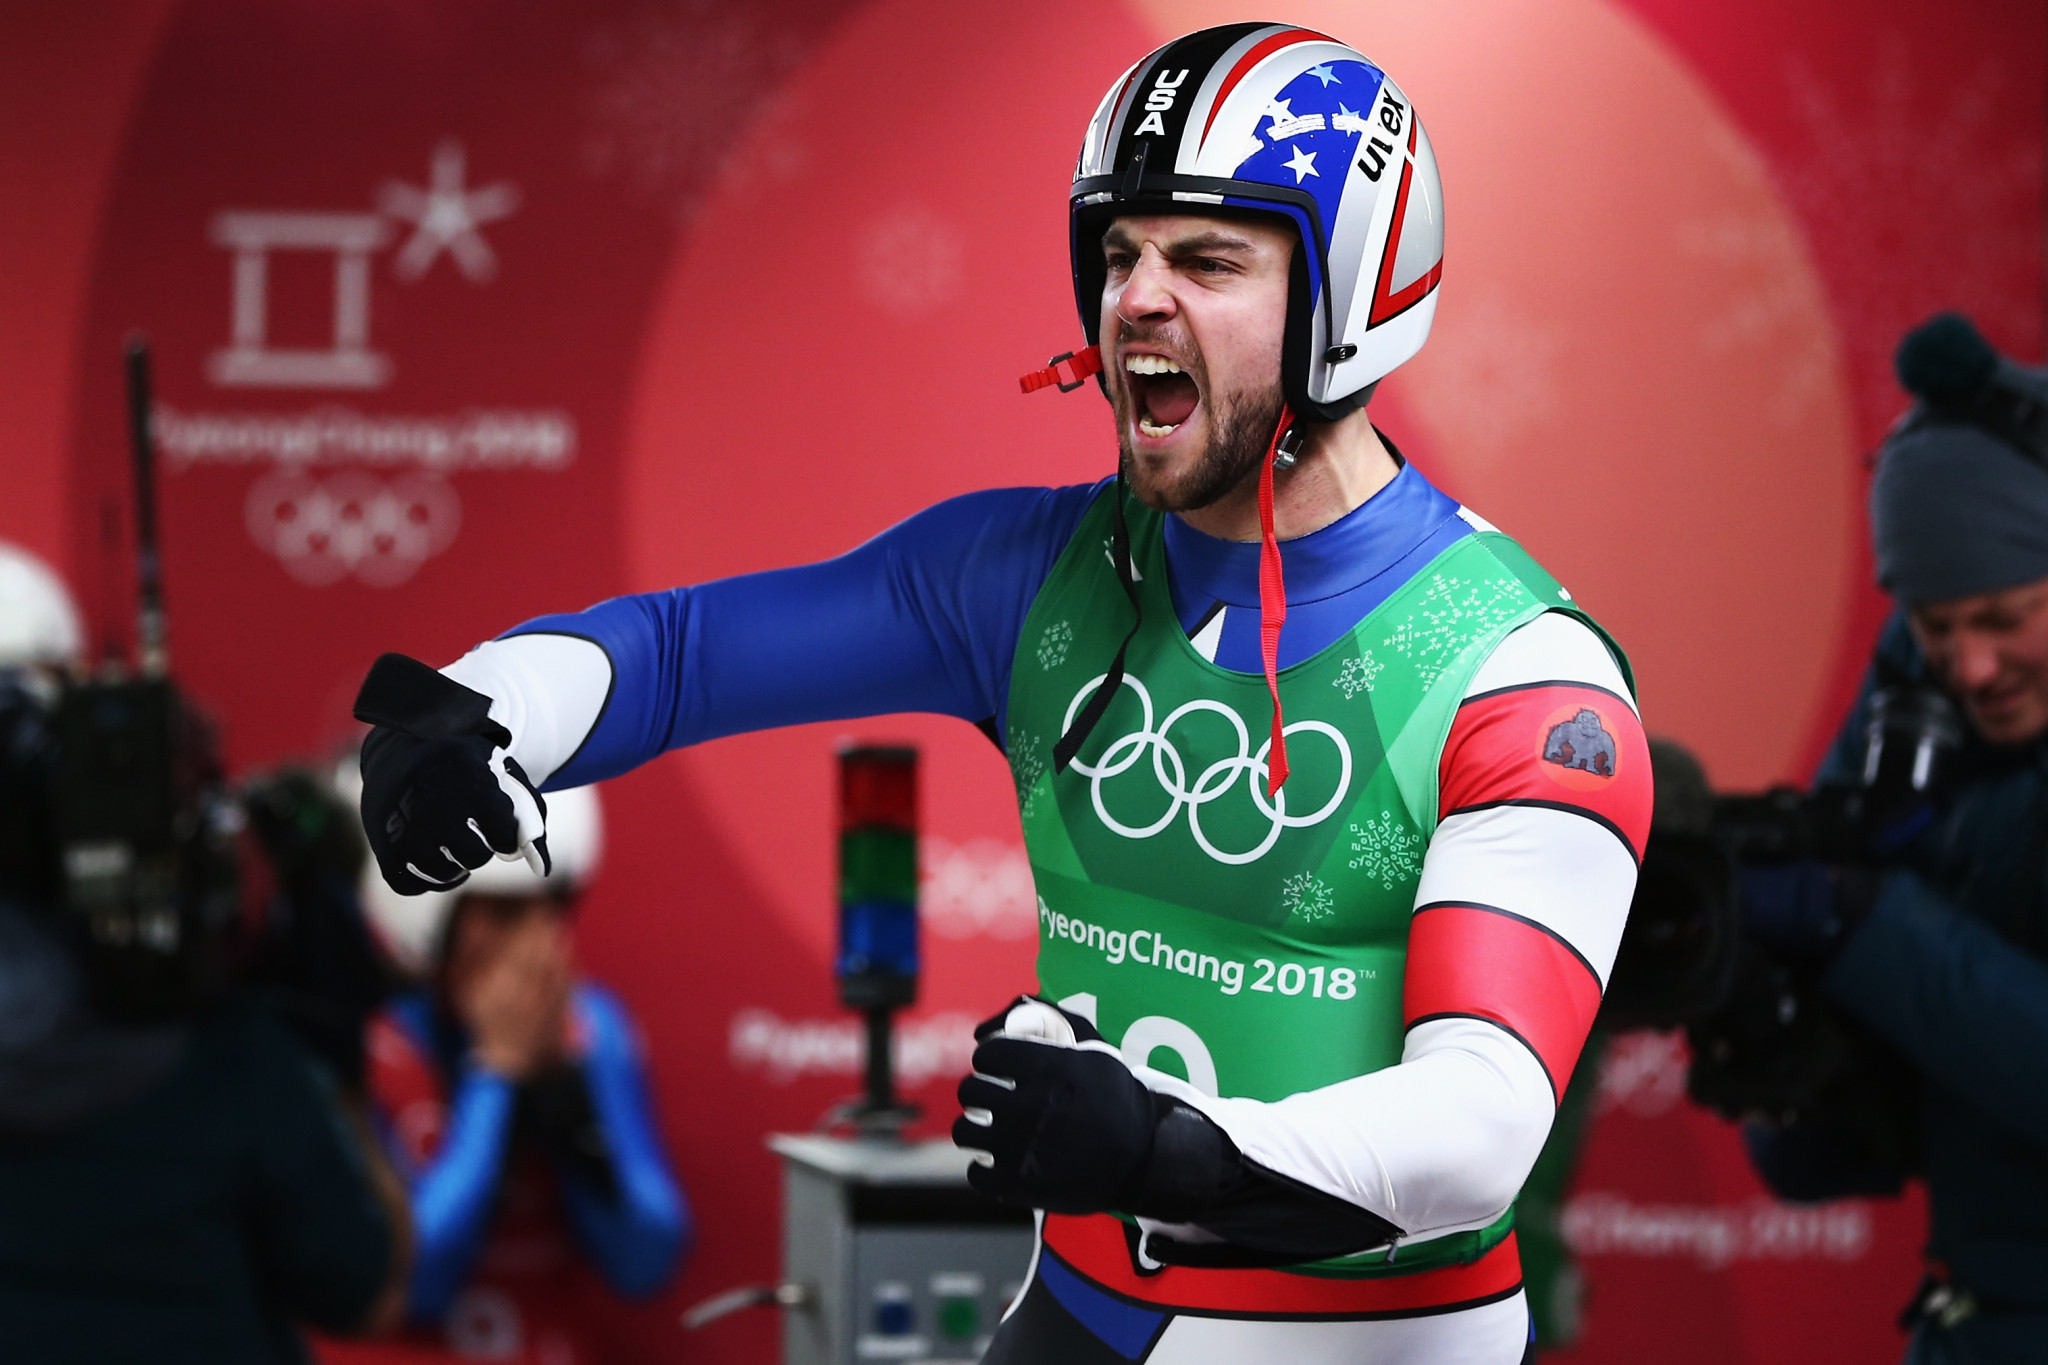 America's Olympic silver medallist Chris Mazdzer will be competing in both the men's singles and doubles event in the upcoming 2018-2019 FIL Luge World Cup season ©Getty Images 